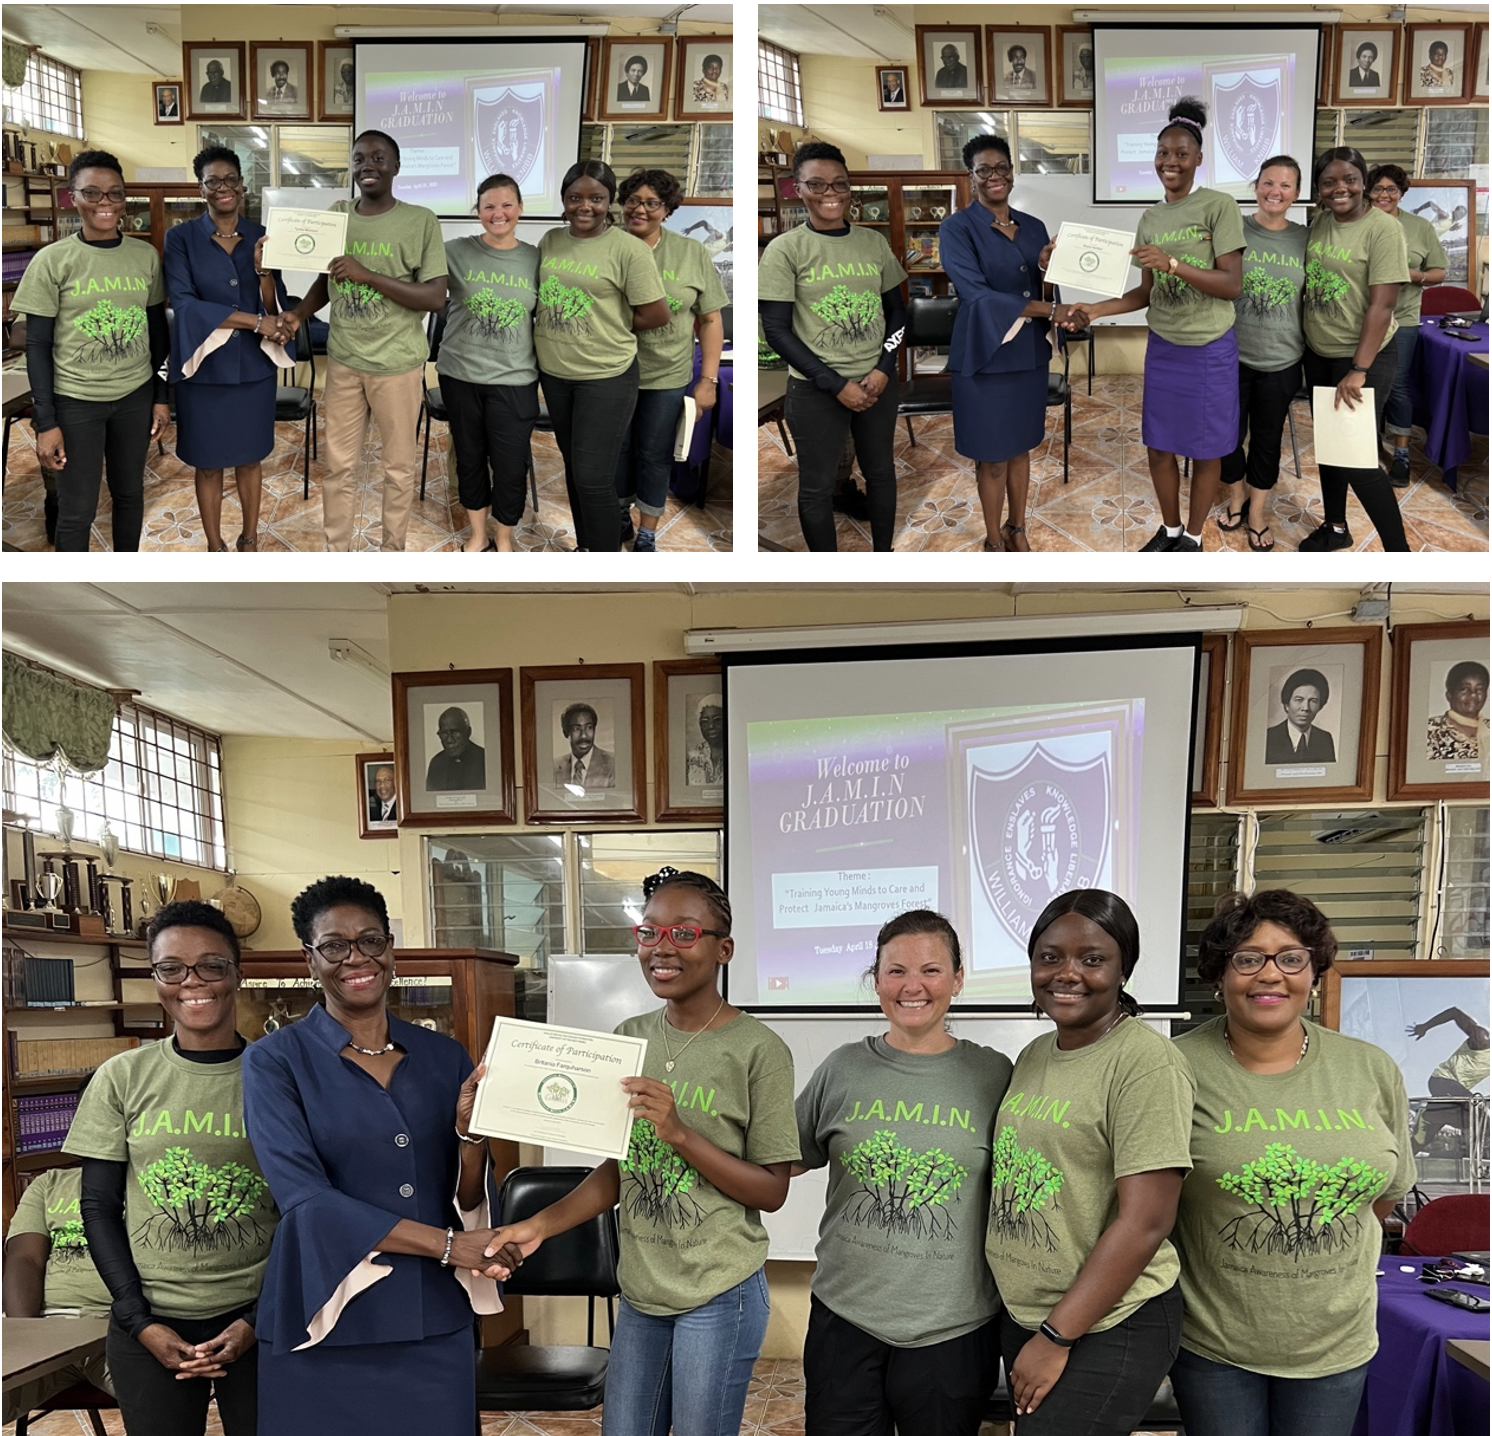 Students proudly receive their well-deserved J.A.M.I.N. certificates of completion, bestowed upon them by a distinguished panel including William Knibb Memorial High School Vice Principal and Science Teacher Andrea Dunn, UWI Discovery Bay Marine Lab staff Shanna Thomas and Trudy-Ann Campbell, and the Director of Education at Living Oceans Foundation, Amy Heemsoth.